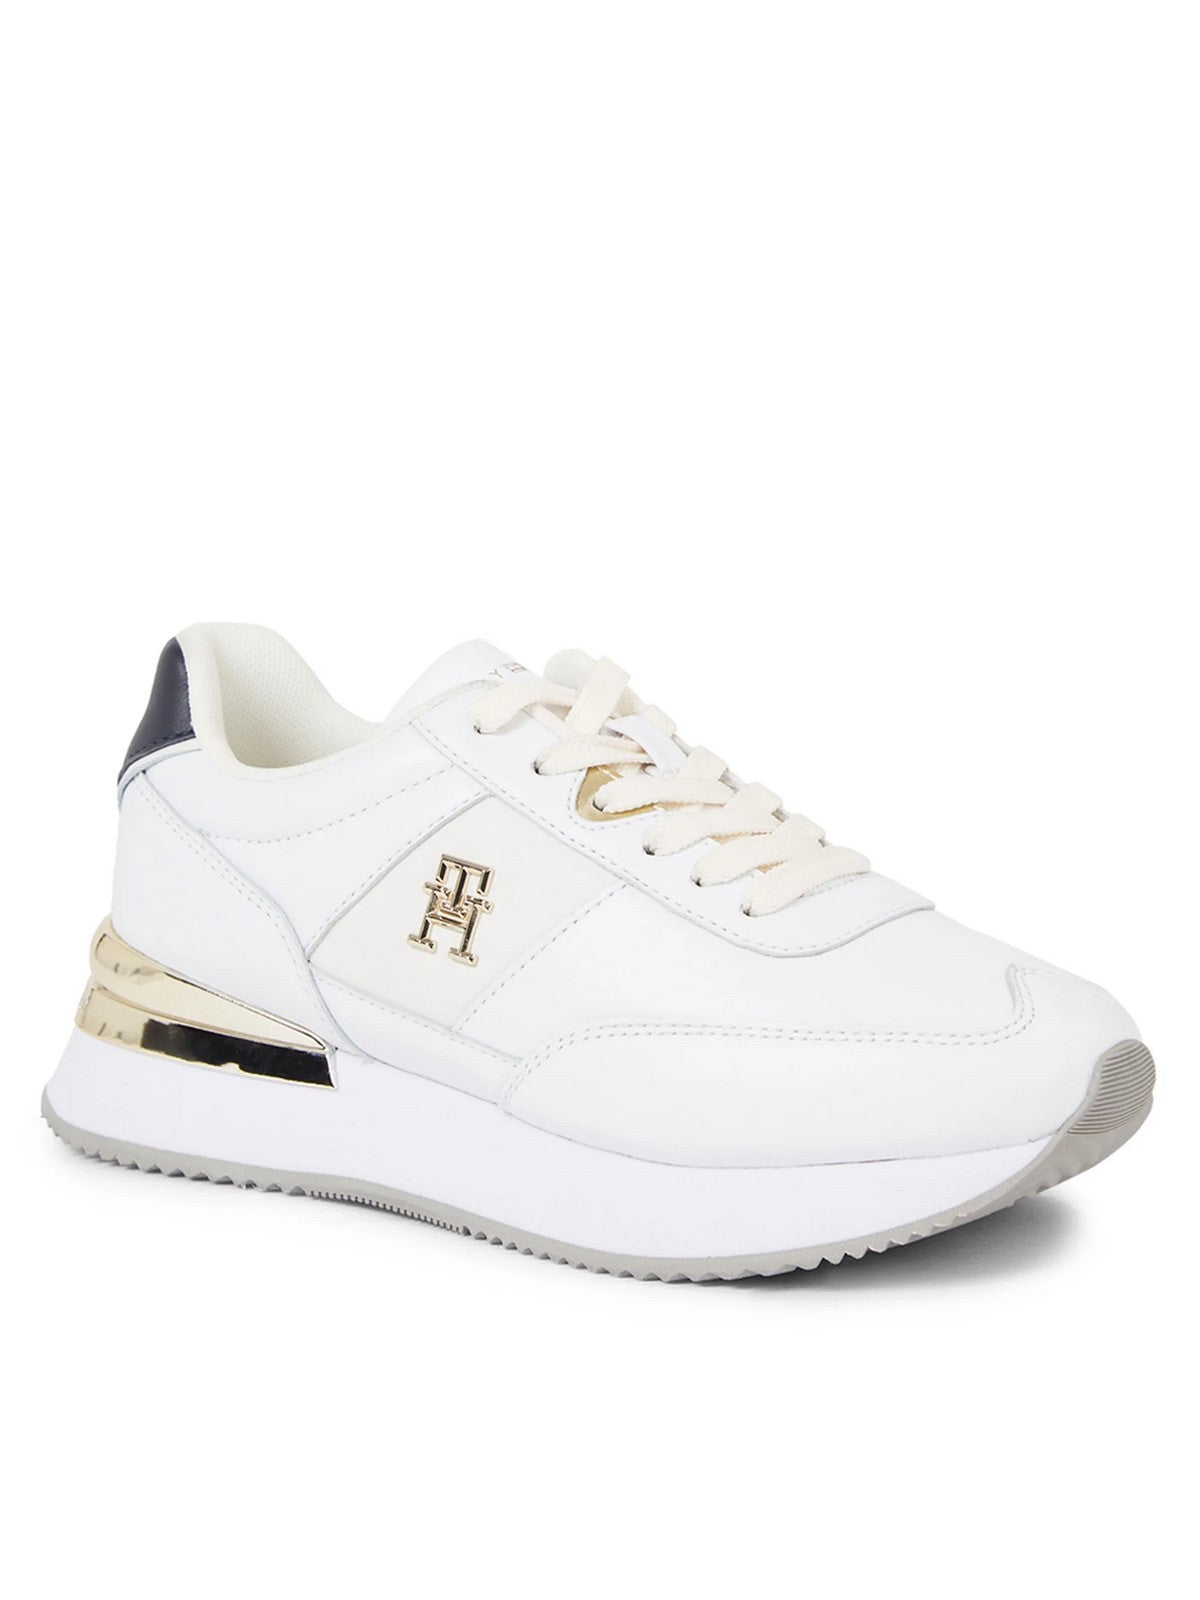 TOMMY HILFIGER Sneaker Donna  FW0FW07306 YBS Bianco